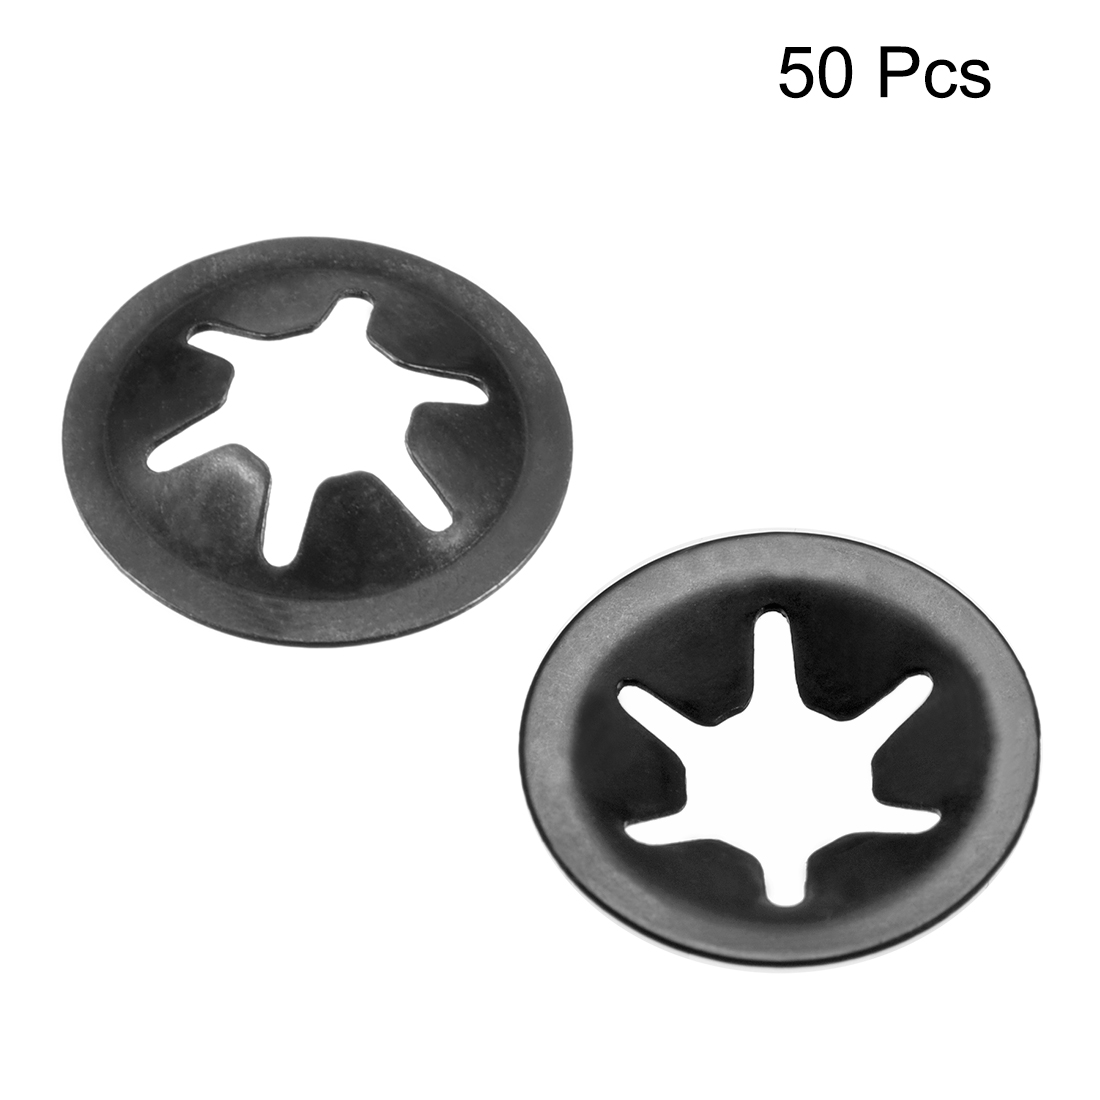 Details about   200pcs M2/M2.5/M3/M4/M5 Internal Tooth Starlock Washers Quick Speed Locking On 